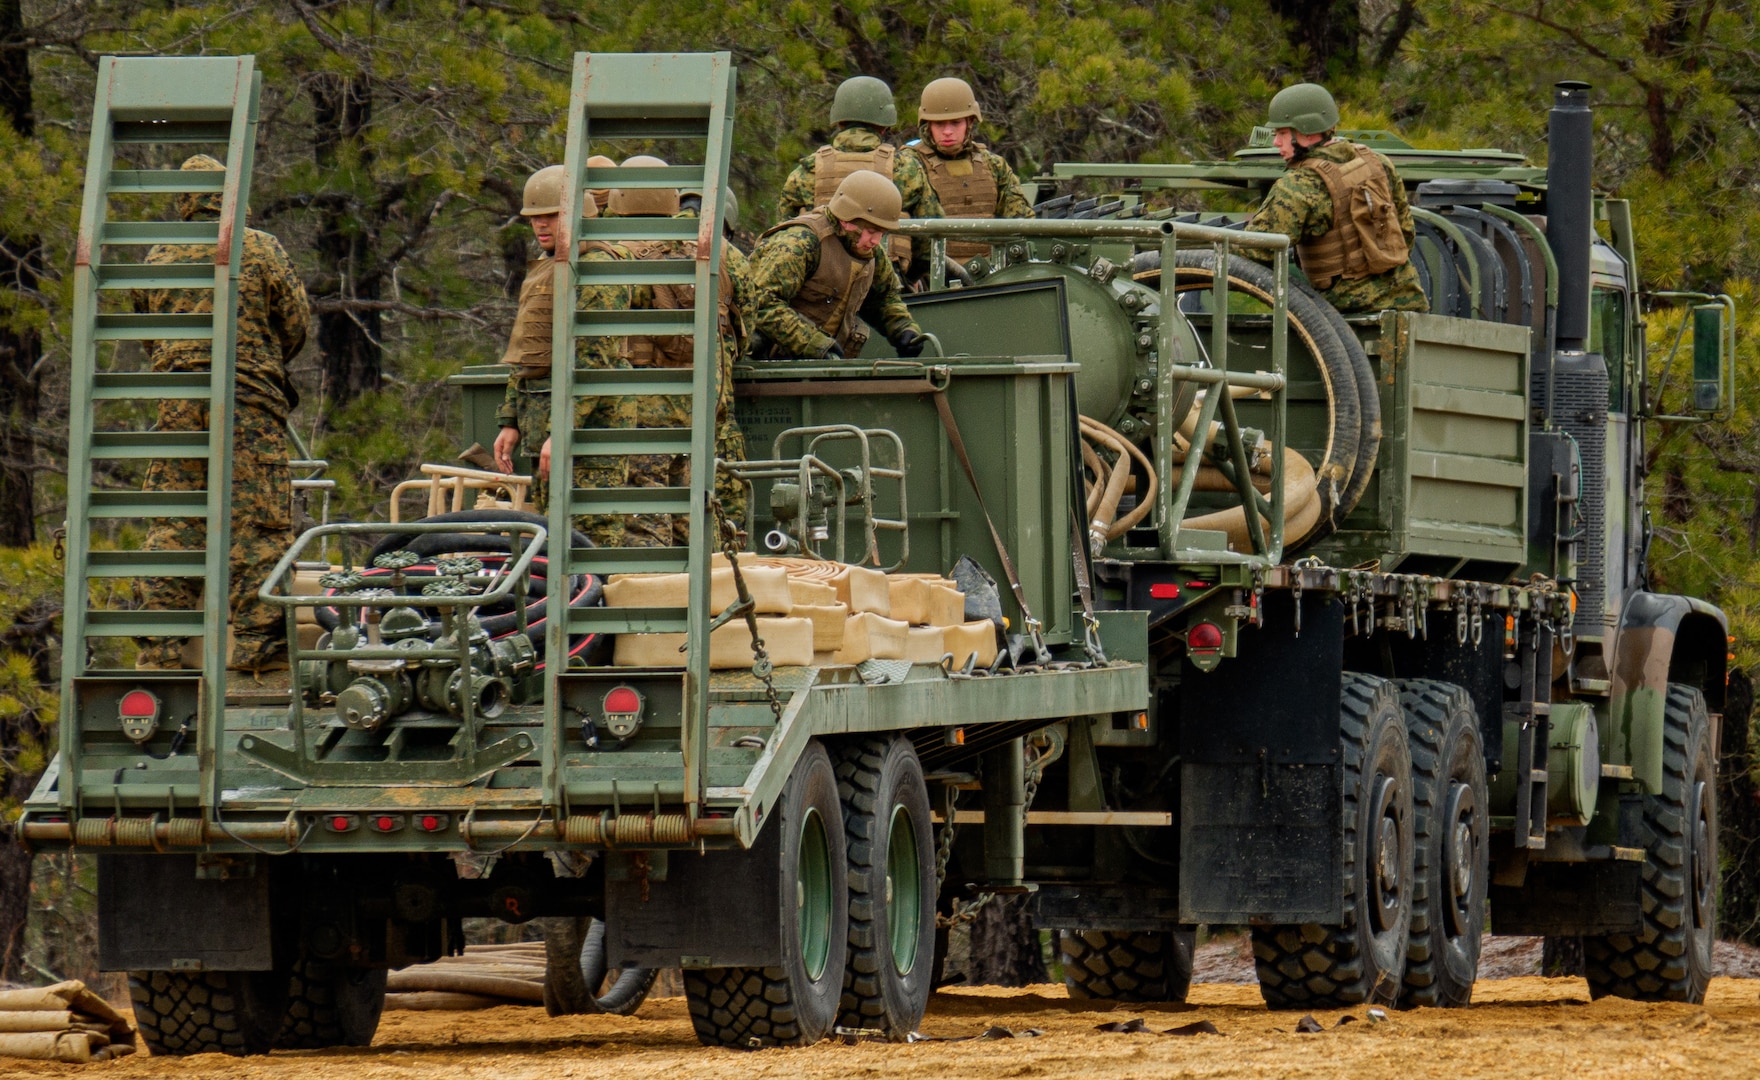 U.S. Marines with 6th Engineer Support Battalion Bulk Fuel Company B, 4th Marine Logistics Group conducting field training with the new Expeditionary Fuel Dispensing System, or EFDS. EFDS is a new program of record that reconfigures capabilities existent in legacy fuel systems, such as the Amphibious Assault Fuel System and the Tactical Airfield Fuel Dispensing System into smaller, more agile expedient capabilities. (U.S. Marine Corps photo by Cpl. Ryan Schmid)